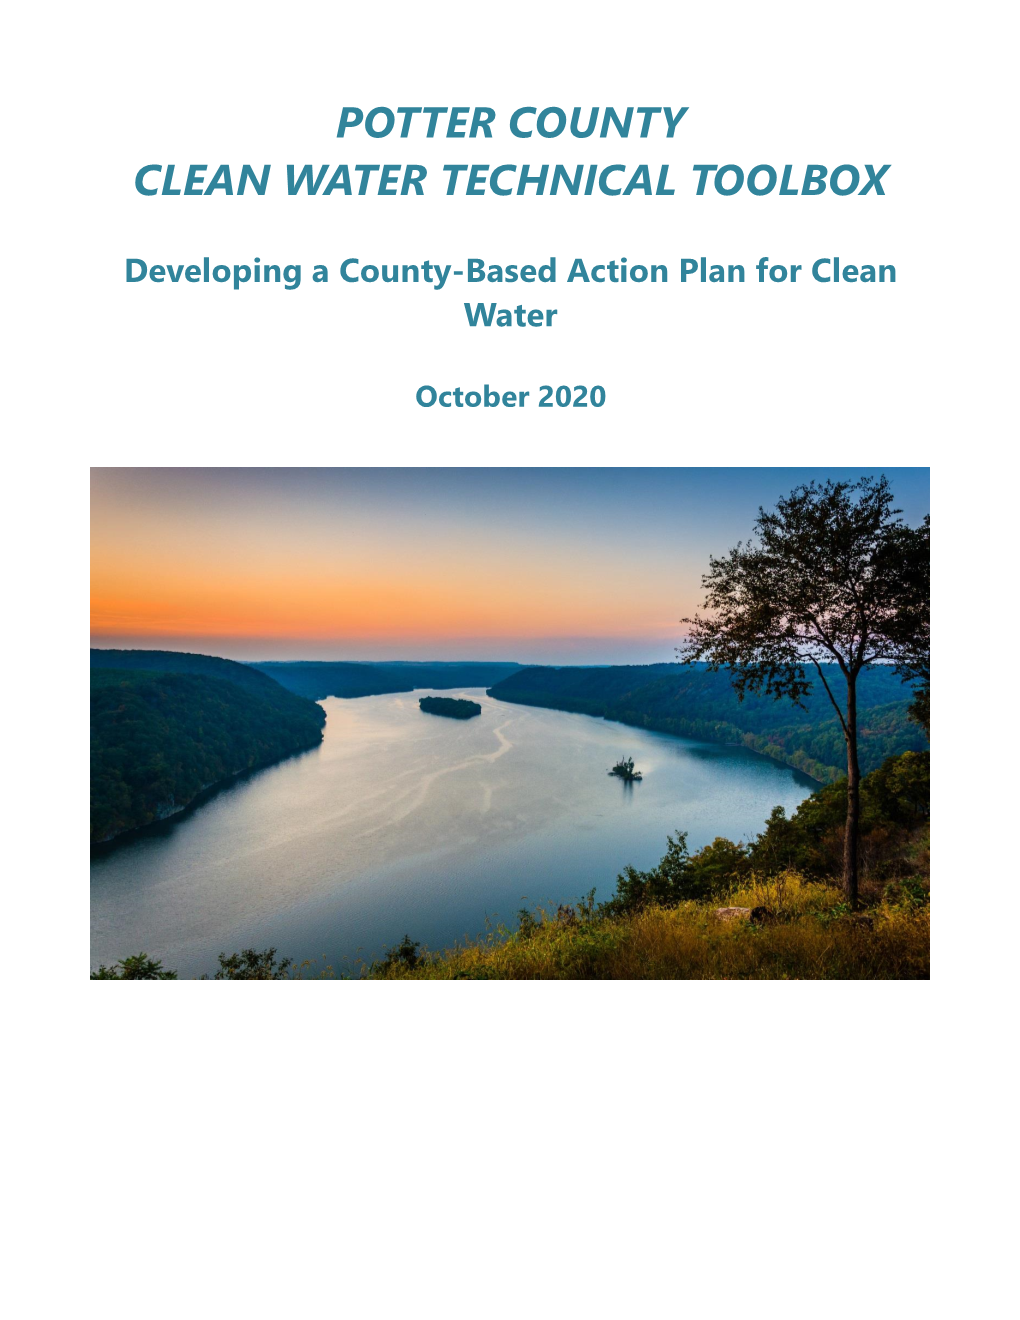 Potter County Clean Water Technical Toolbox